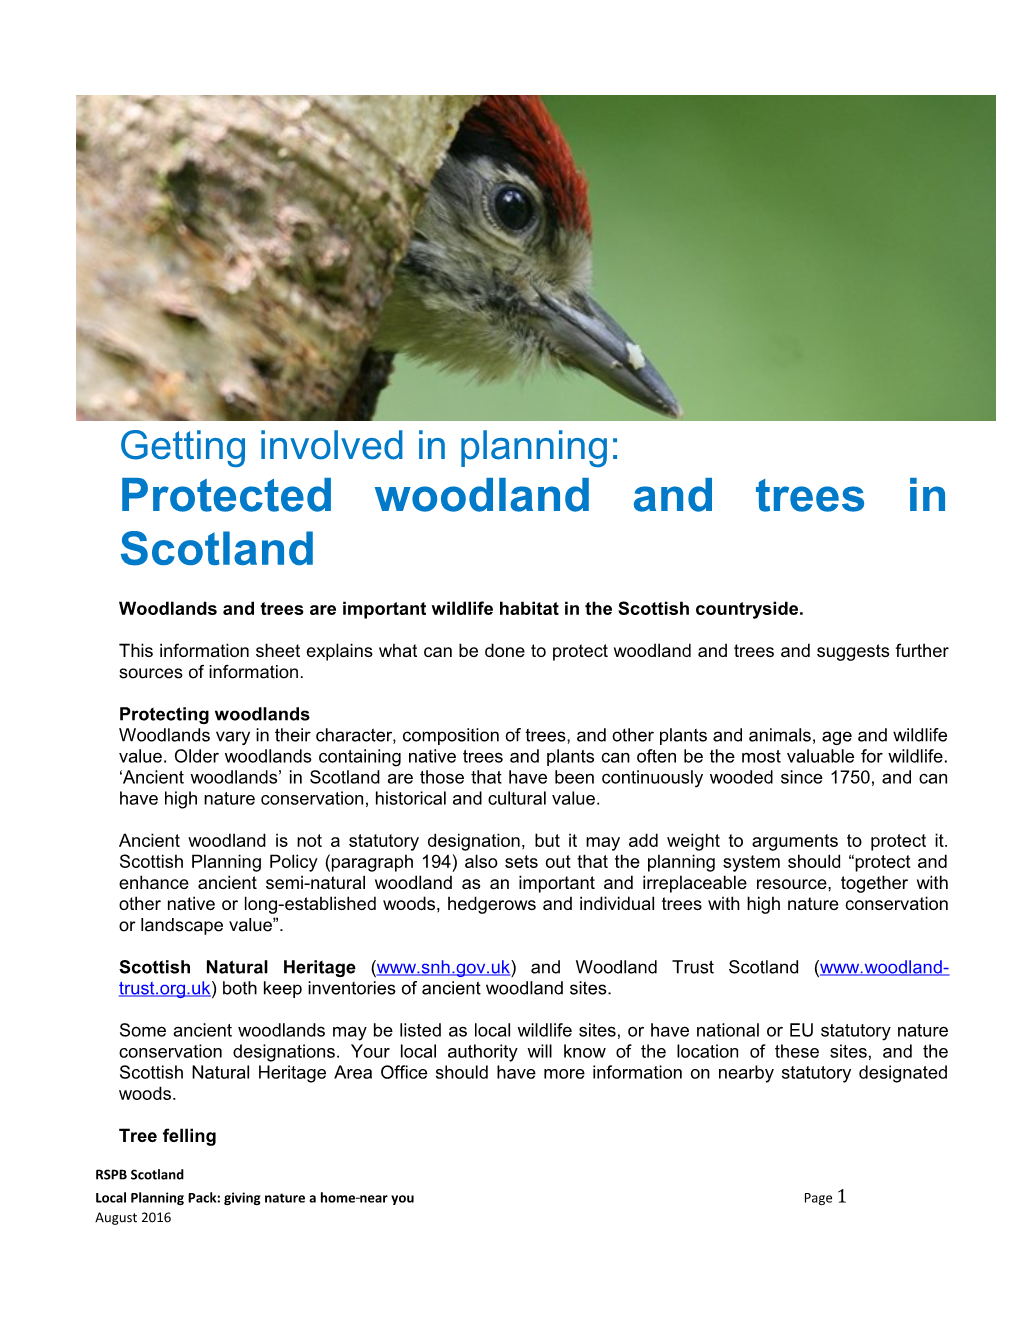 Protected Woodland and Trees in Scotland